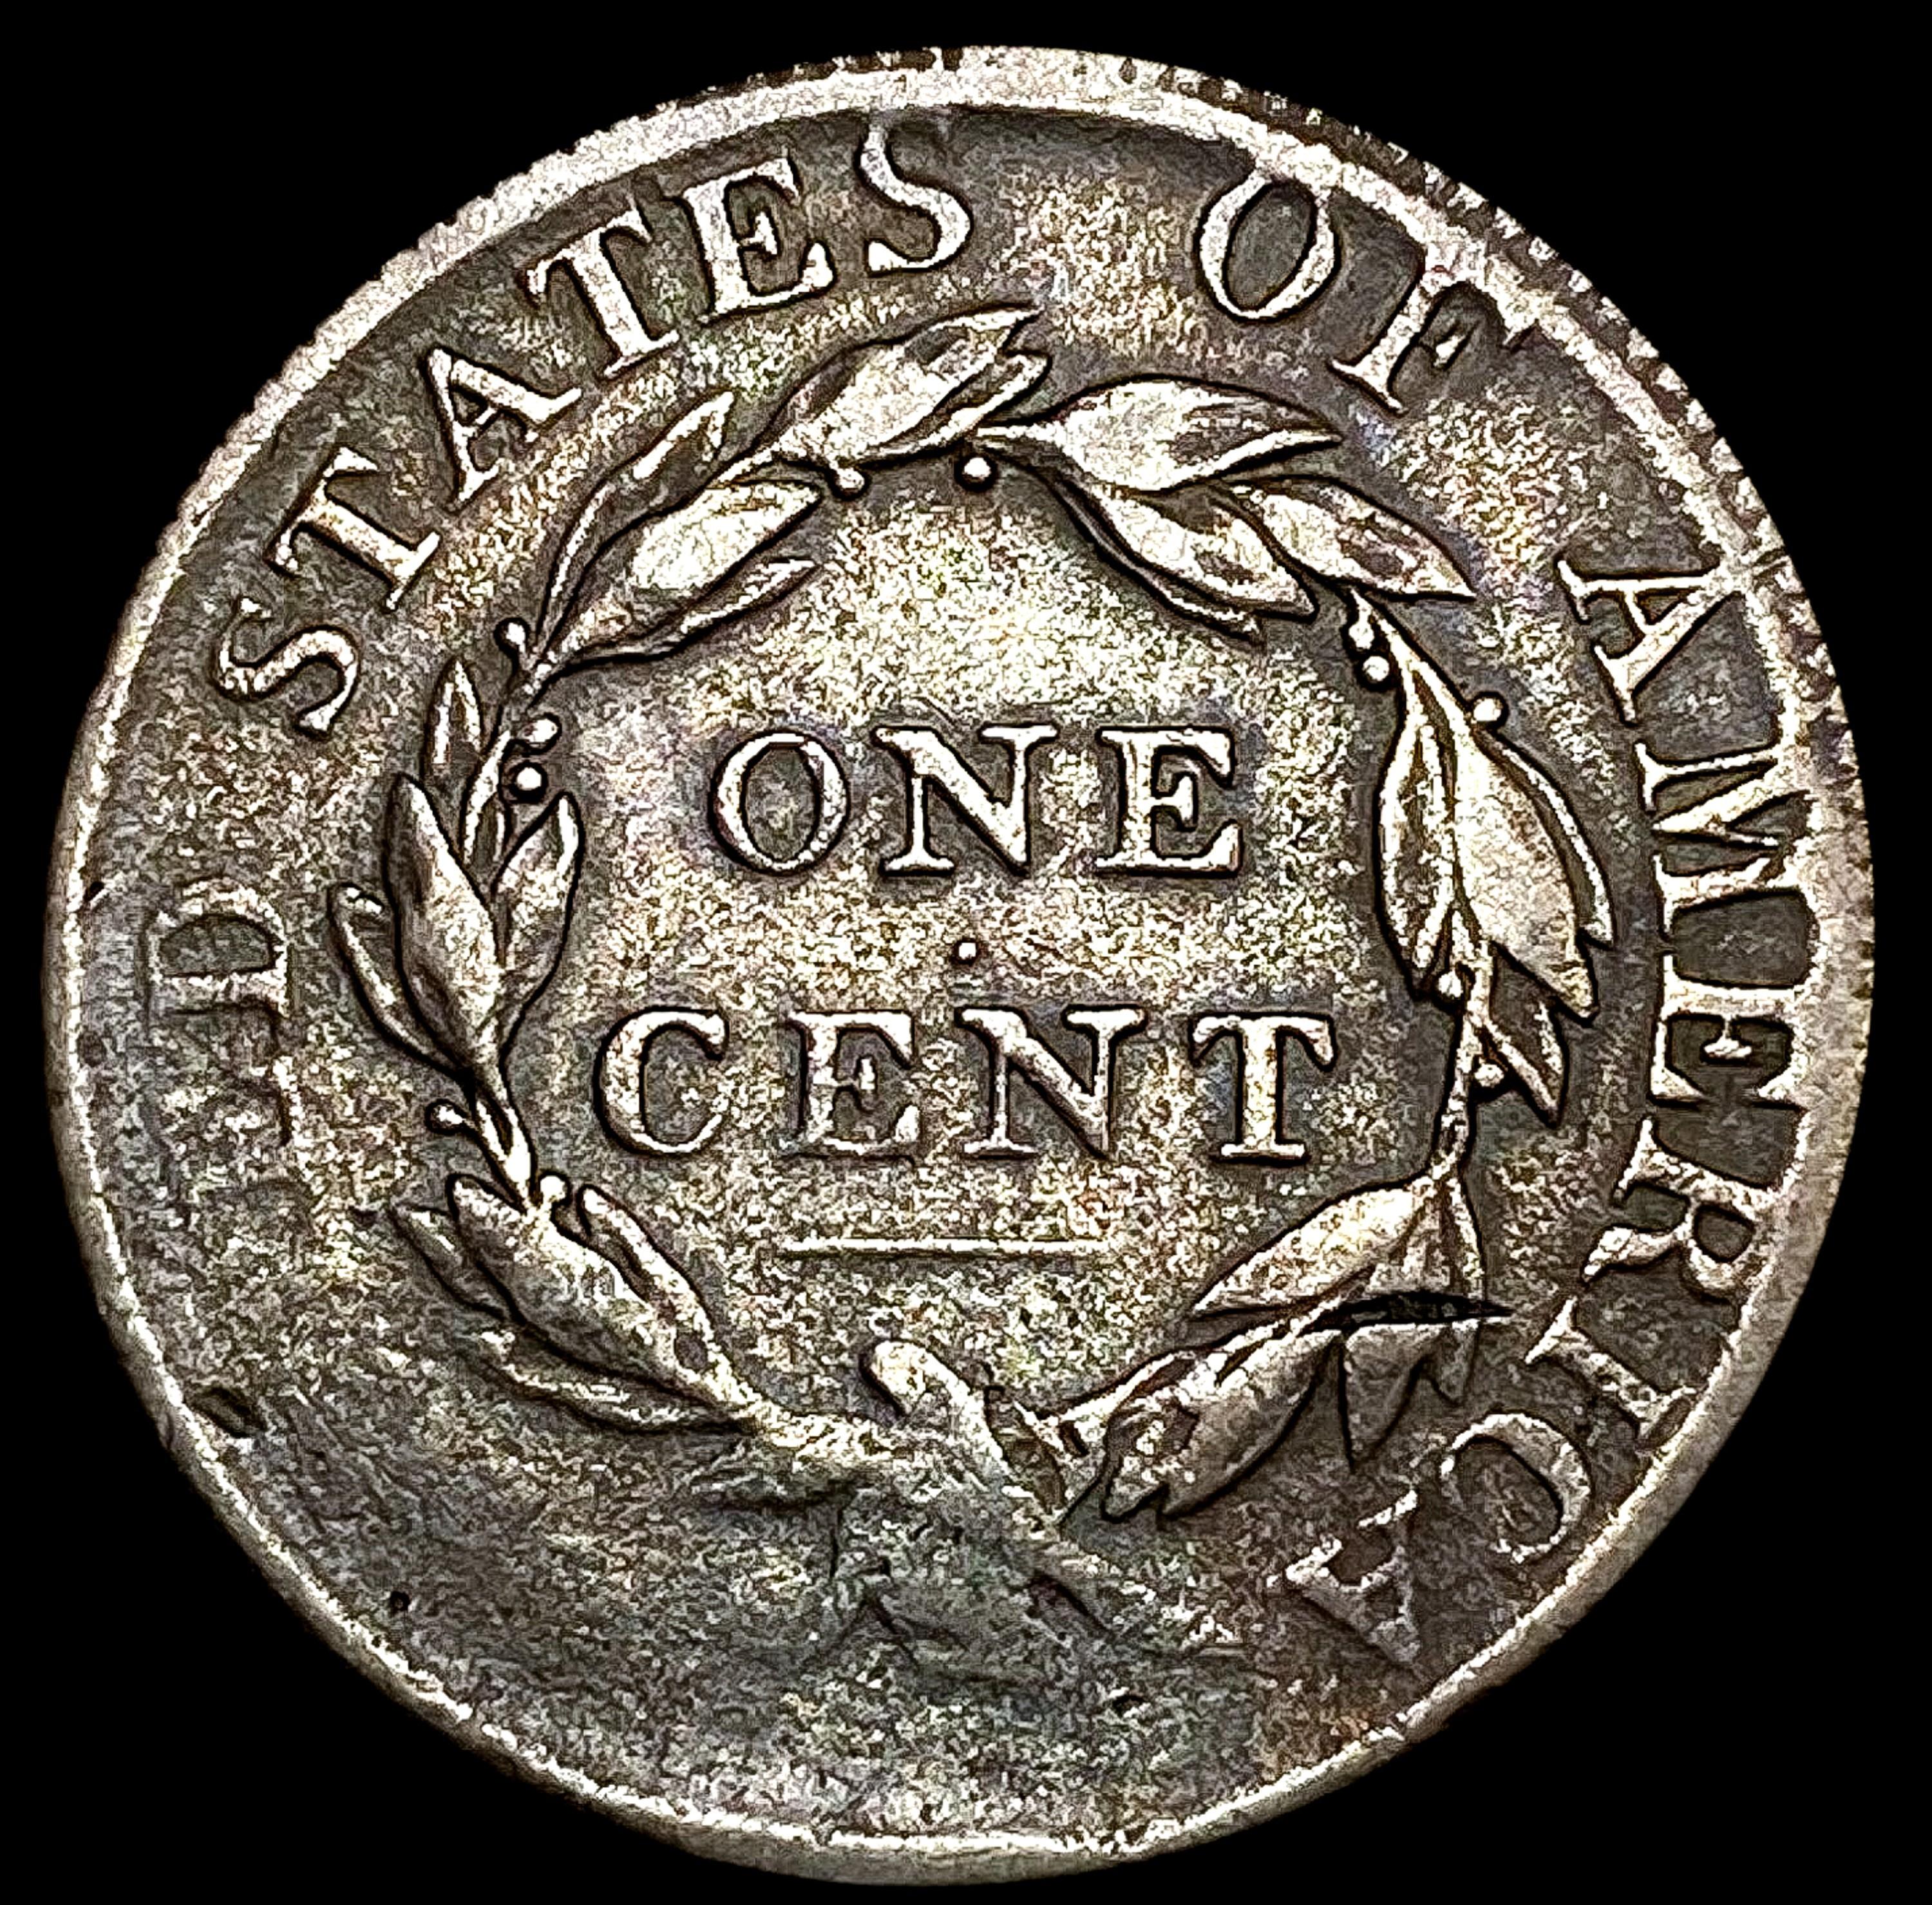 1813 Classic Head Large Cent NICELY CIRCULATED